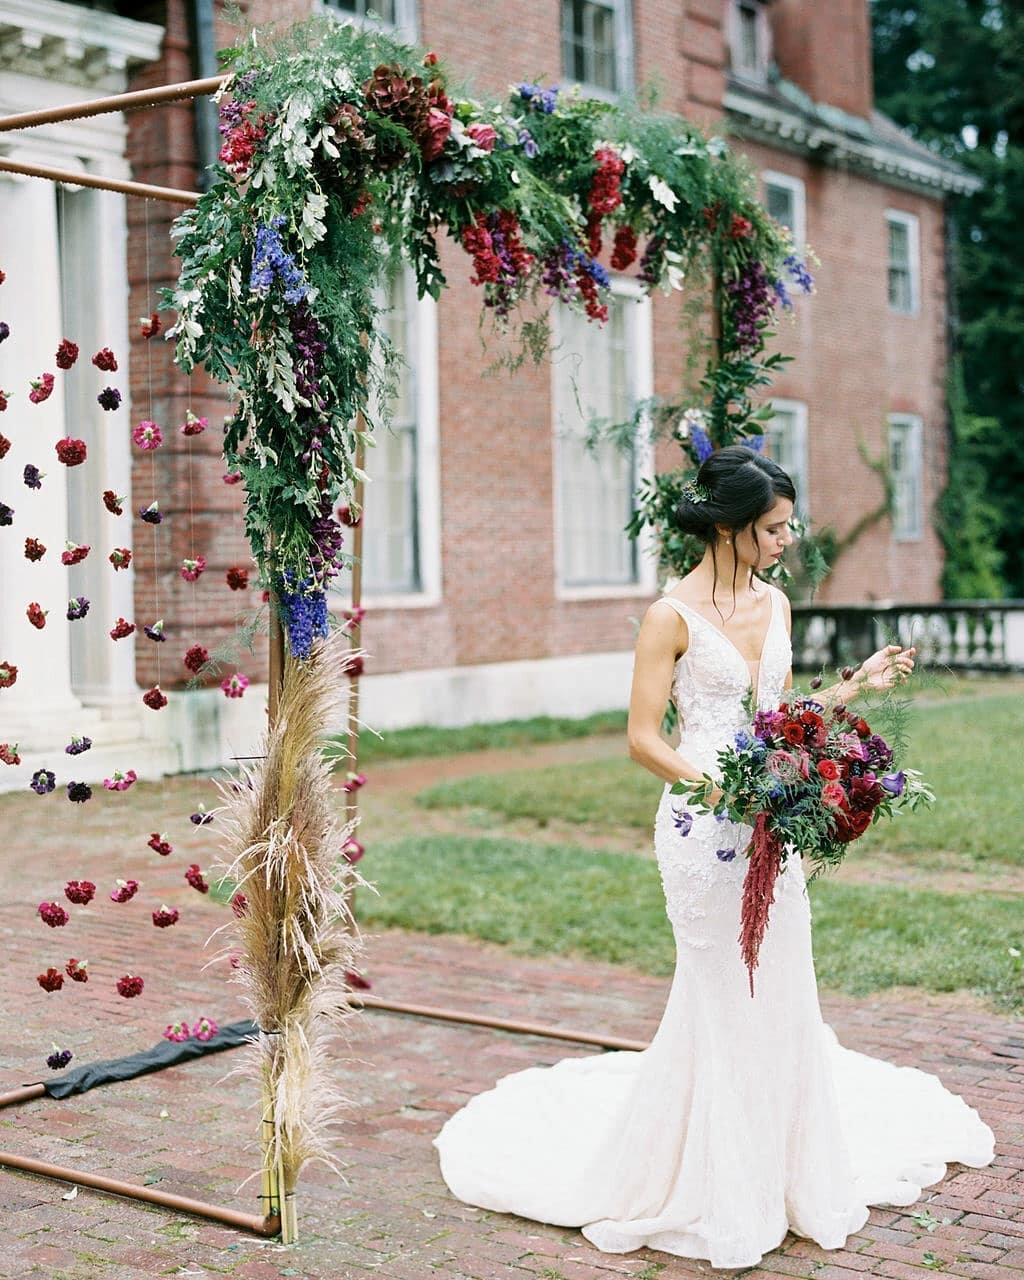 This styled shoot perfectly captures the soft beauty of a spring wedding from the jewel-toned color palette to the bold flower decor. Perfectly complemented by the floral appliques on our Thea gown, this series of photos gives life to a modern fairyt